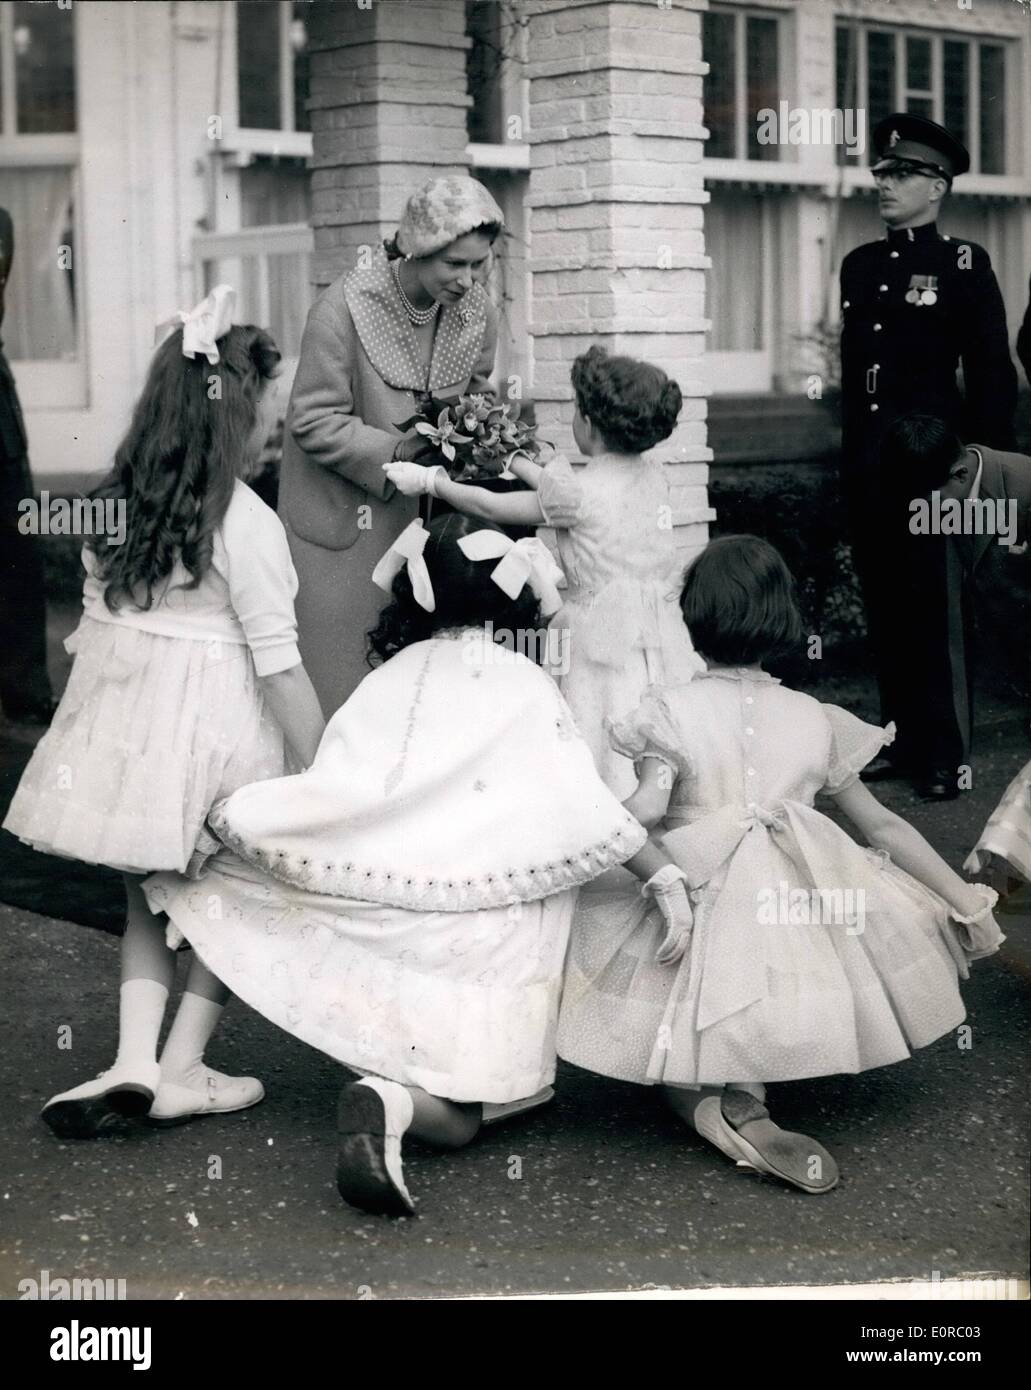 Dec. 12, 1958 - Bouquets For The Queen: Six children - representing the commonwealth - curtsy for H.M. The Queen and present her with a bouquet - after a reception at the Dierentuin, The Hague - during state visit to the Netherlands.. The actual presentation is being made by Ann McGlashan. Stock Photo